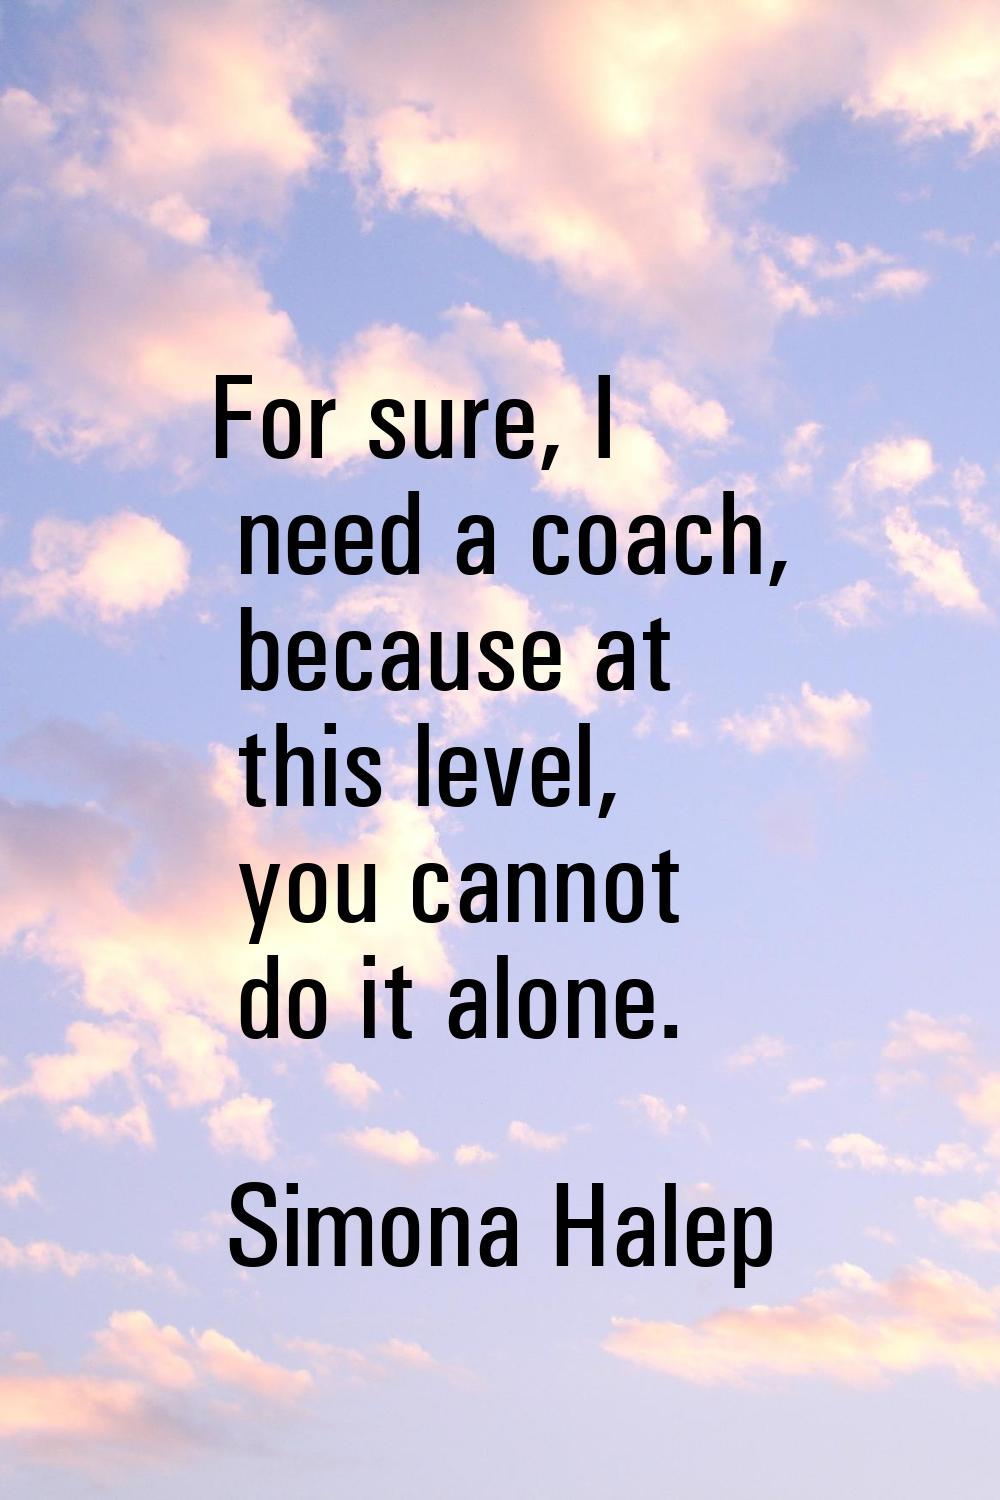 For sure, I need a coach, because at this level, you cannot do it alone.